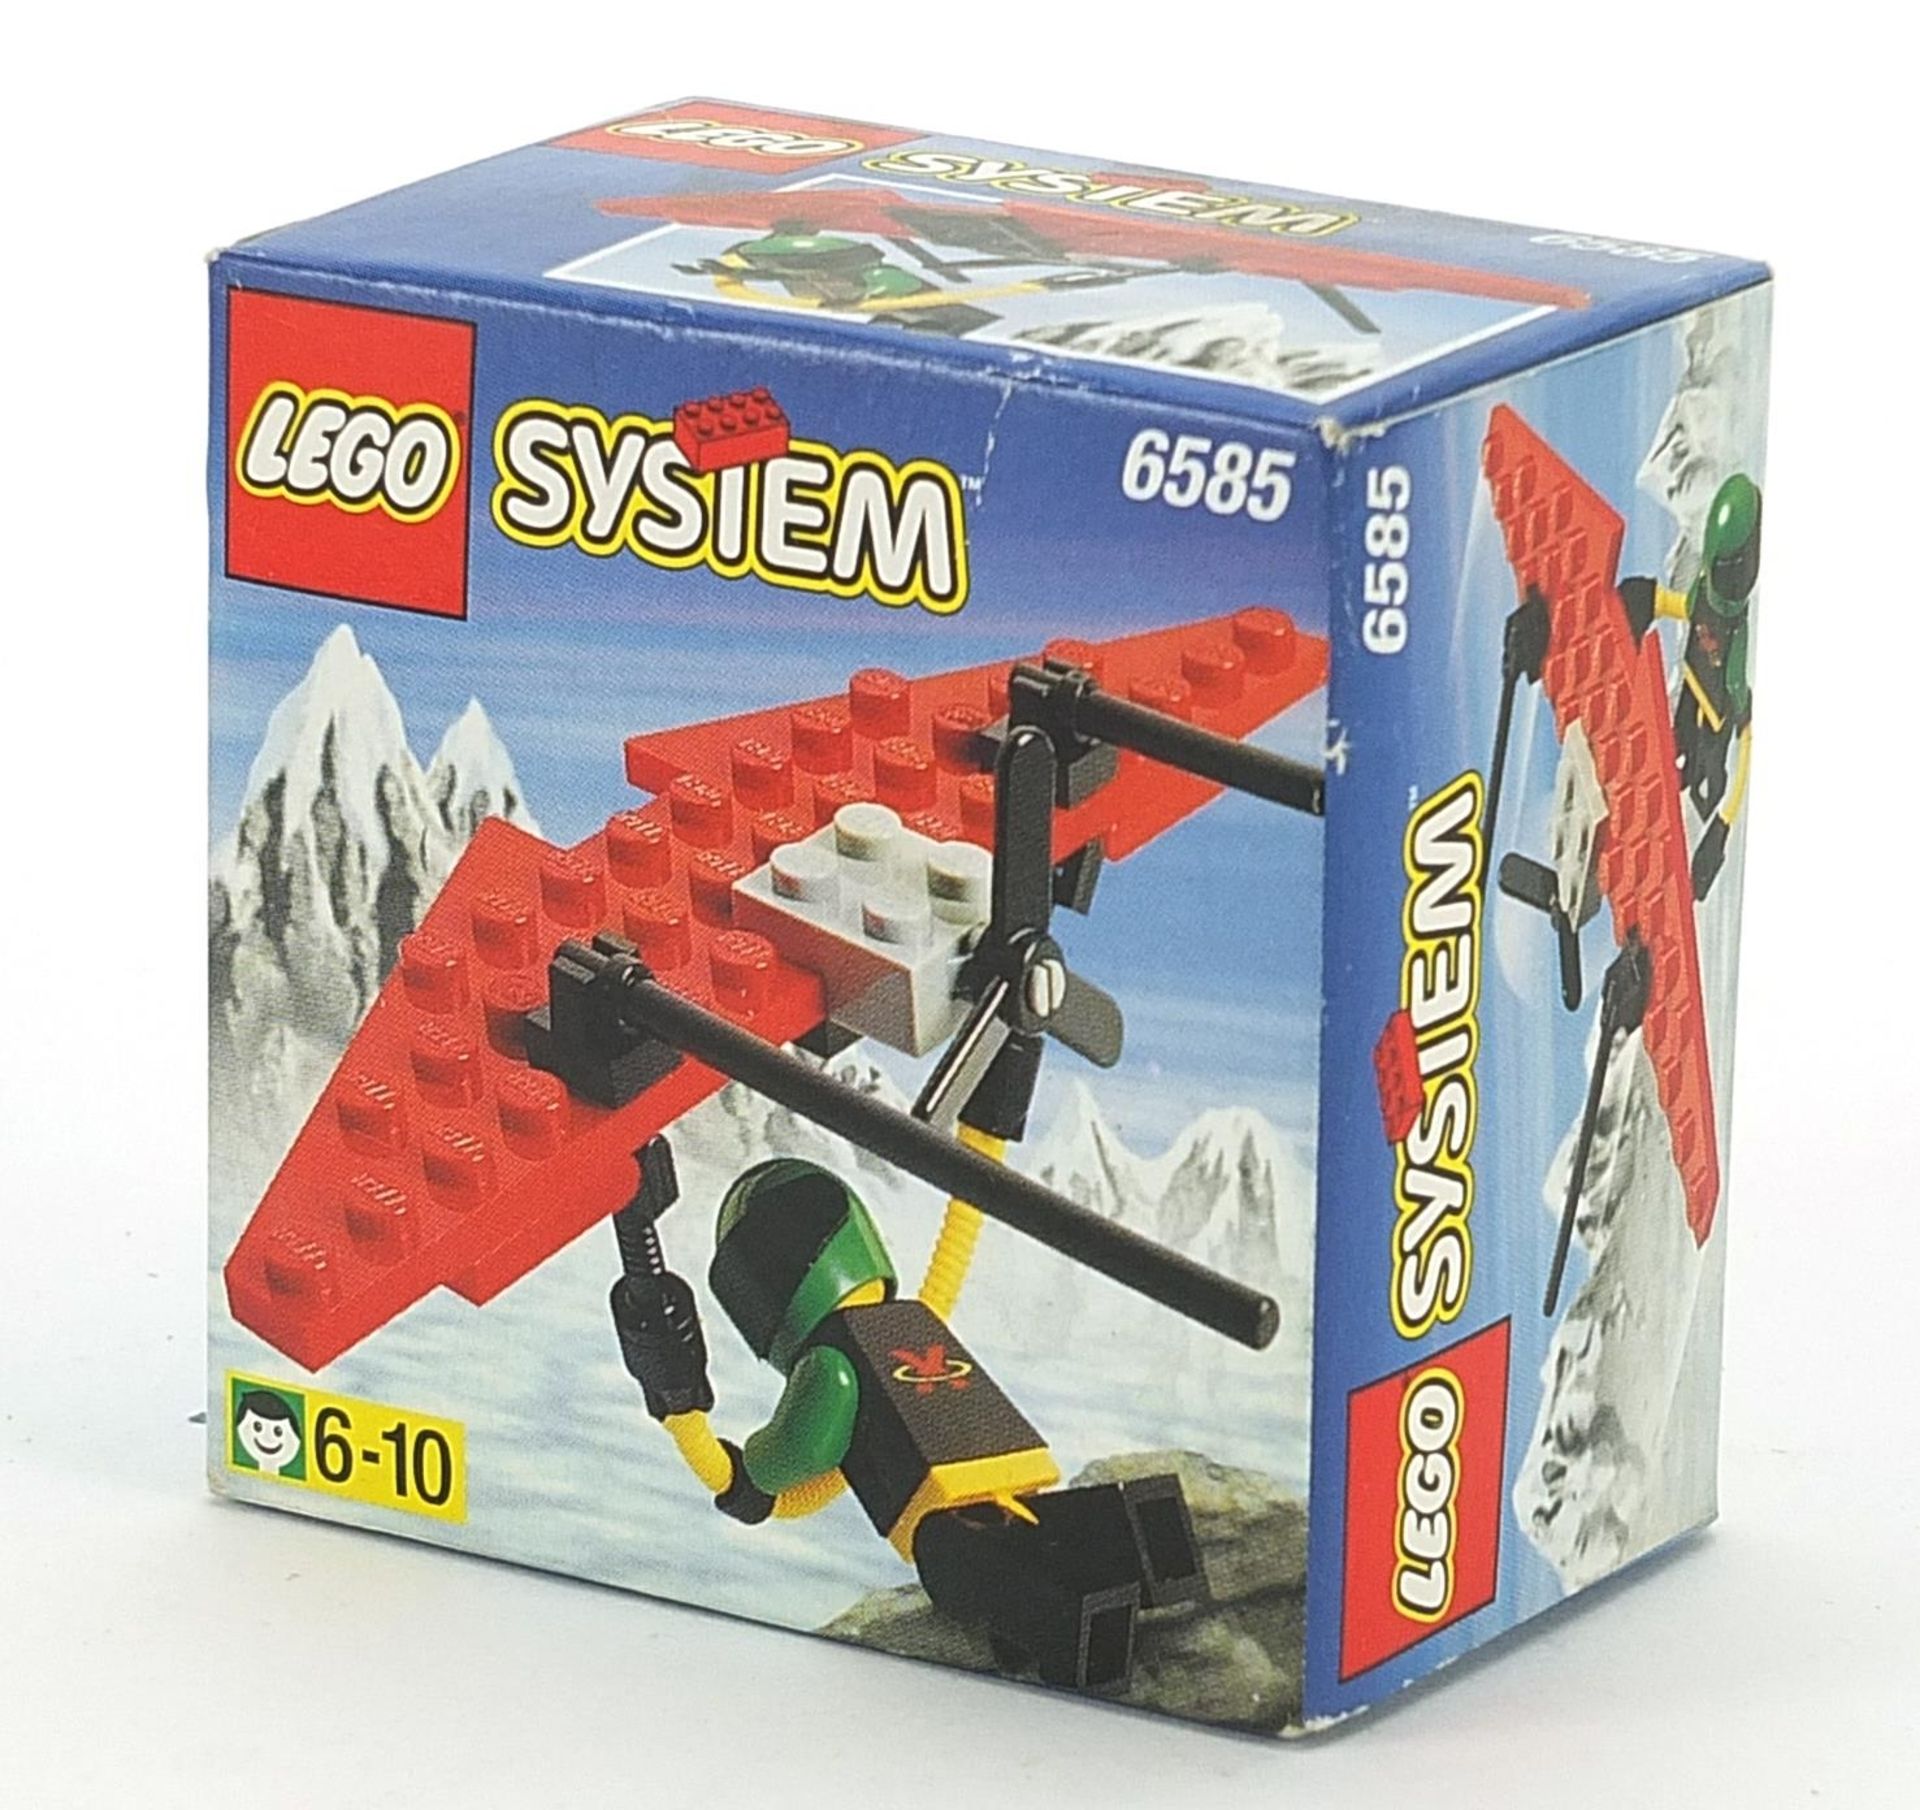 Vintage Lego System hang glider with box, 6585